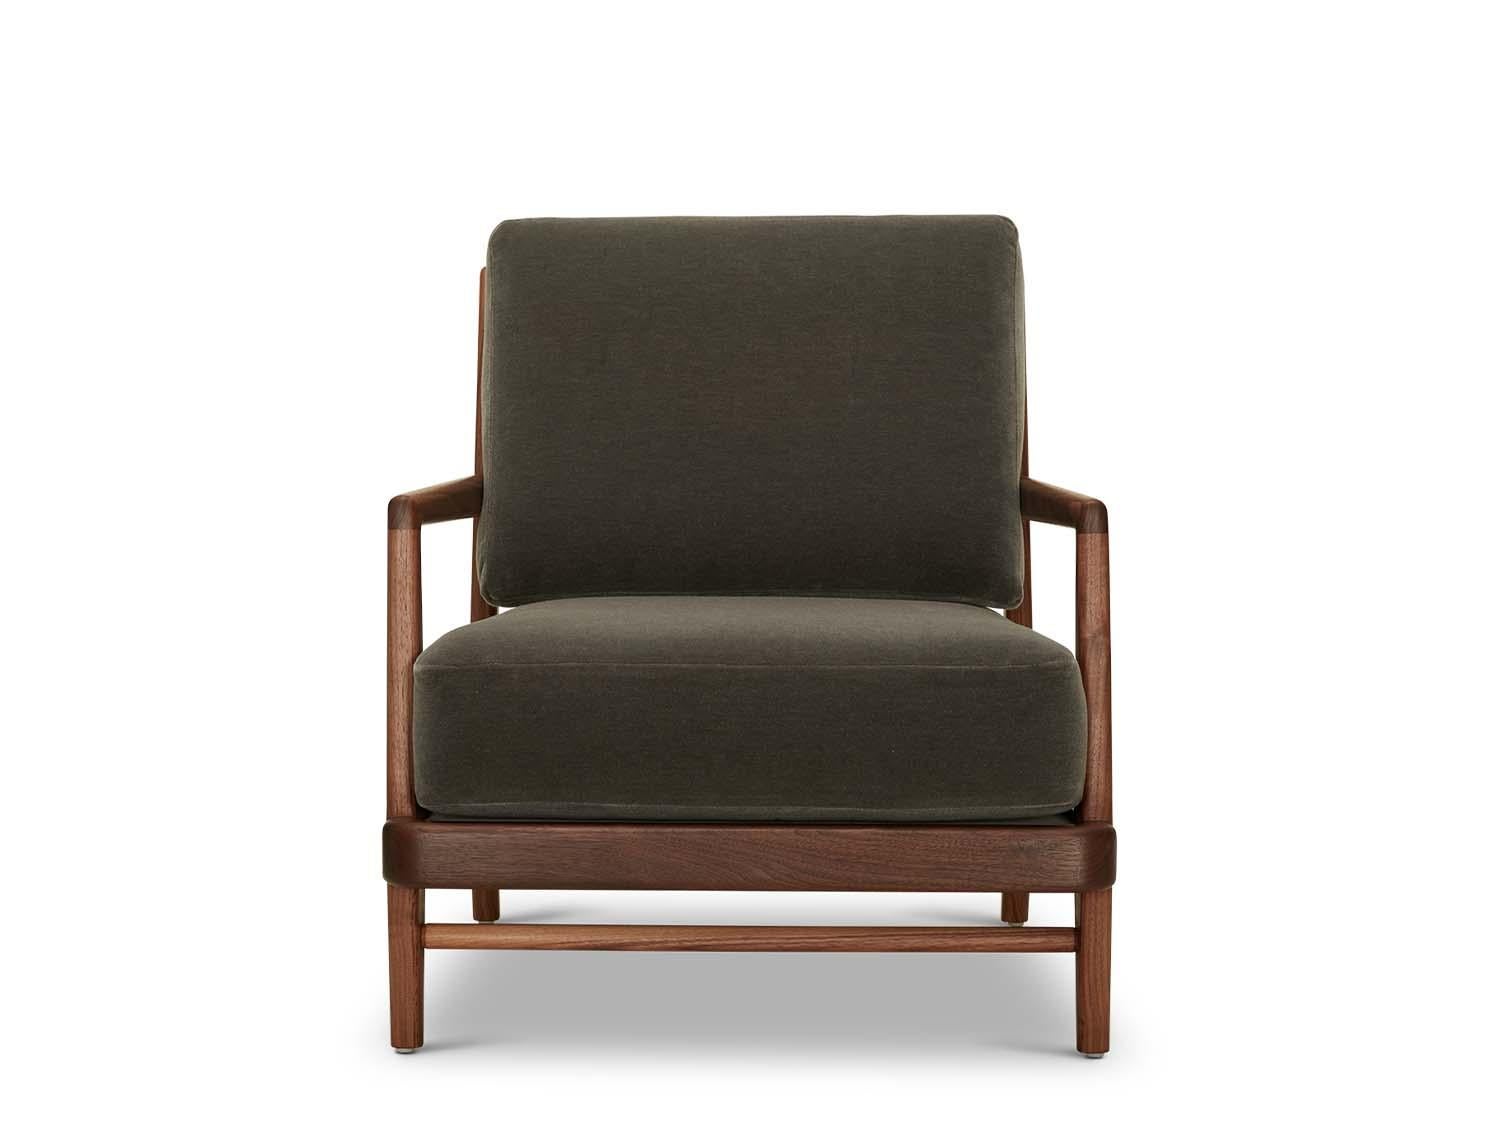 The Headlands lounge chair by Lawson-Fenning features a sculptural solid wood frame and upholstered cushions.

The Lawson-Fenning Collection is designed and handmade in Los Angeles, California. Reach out to discover what options are currently in